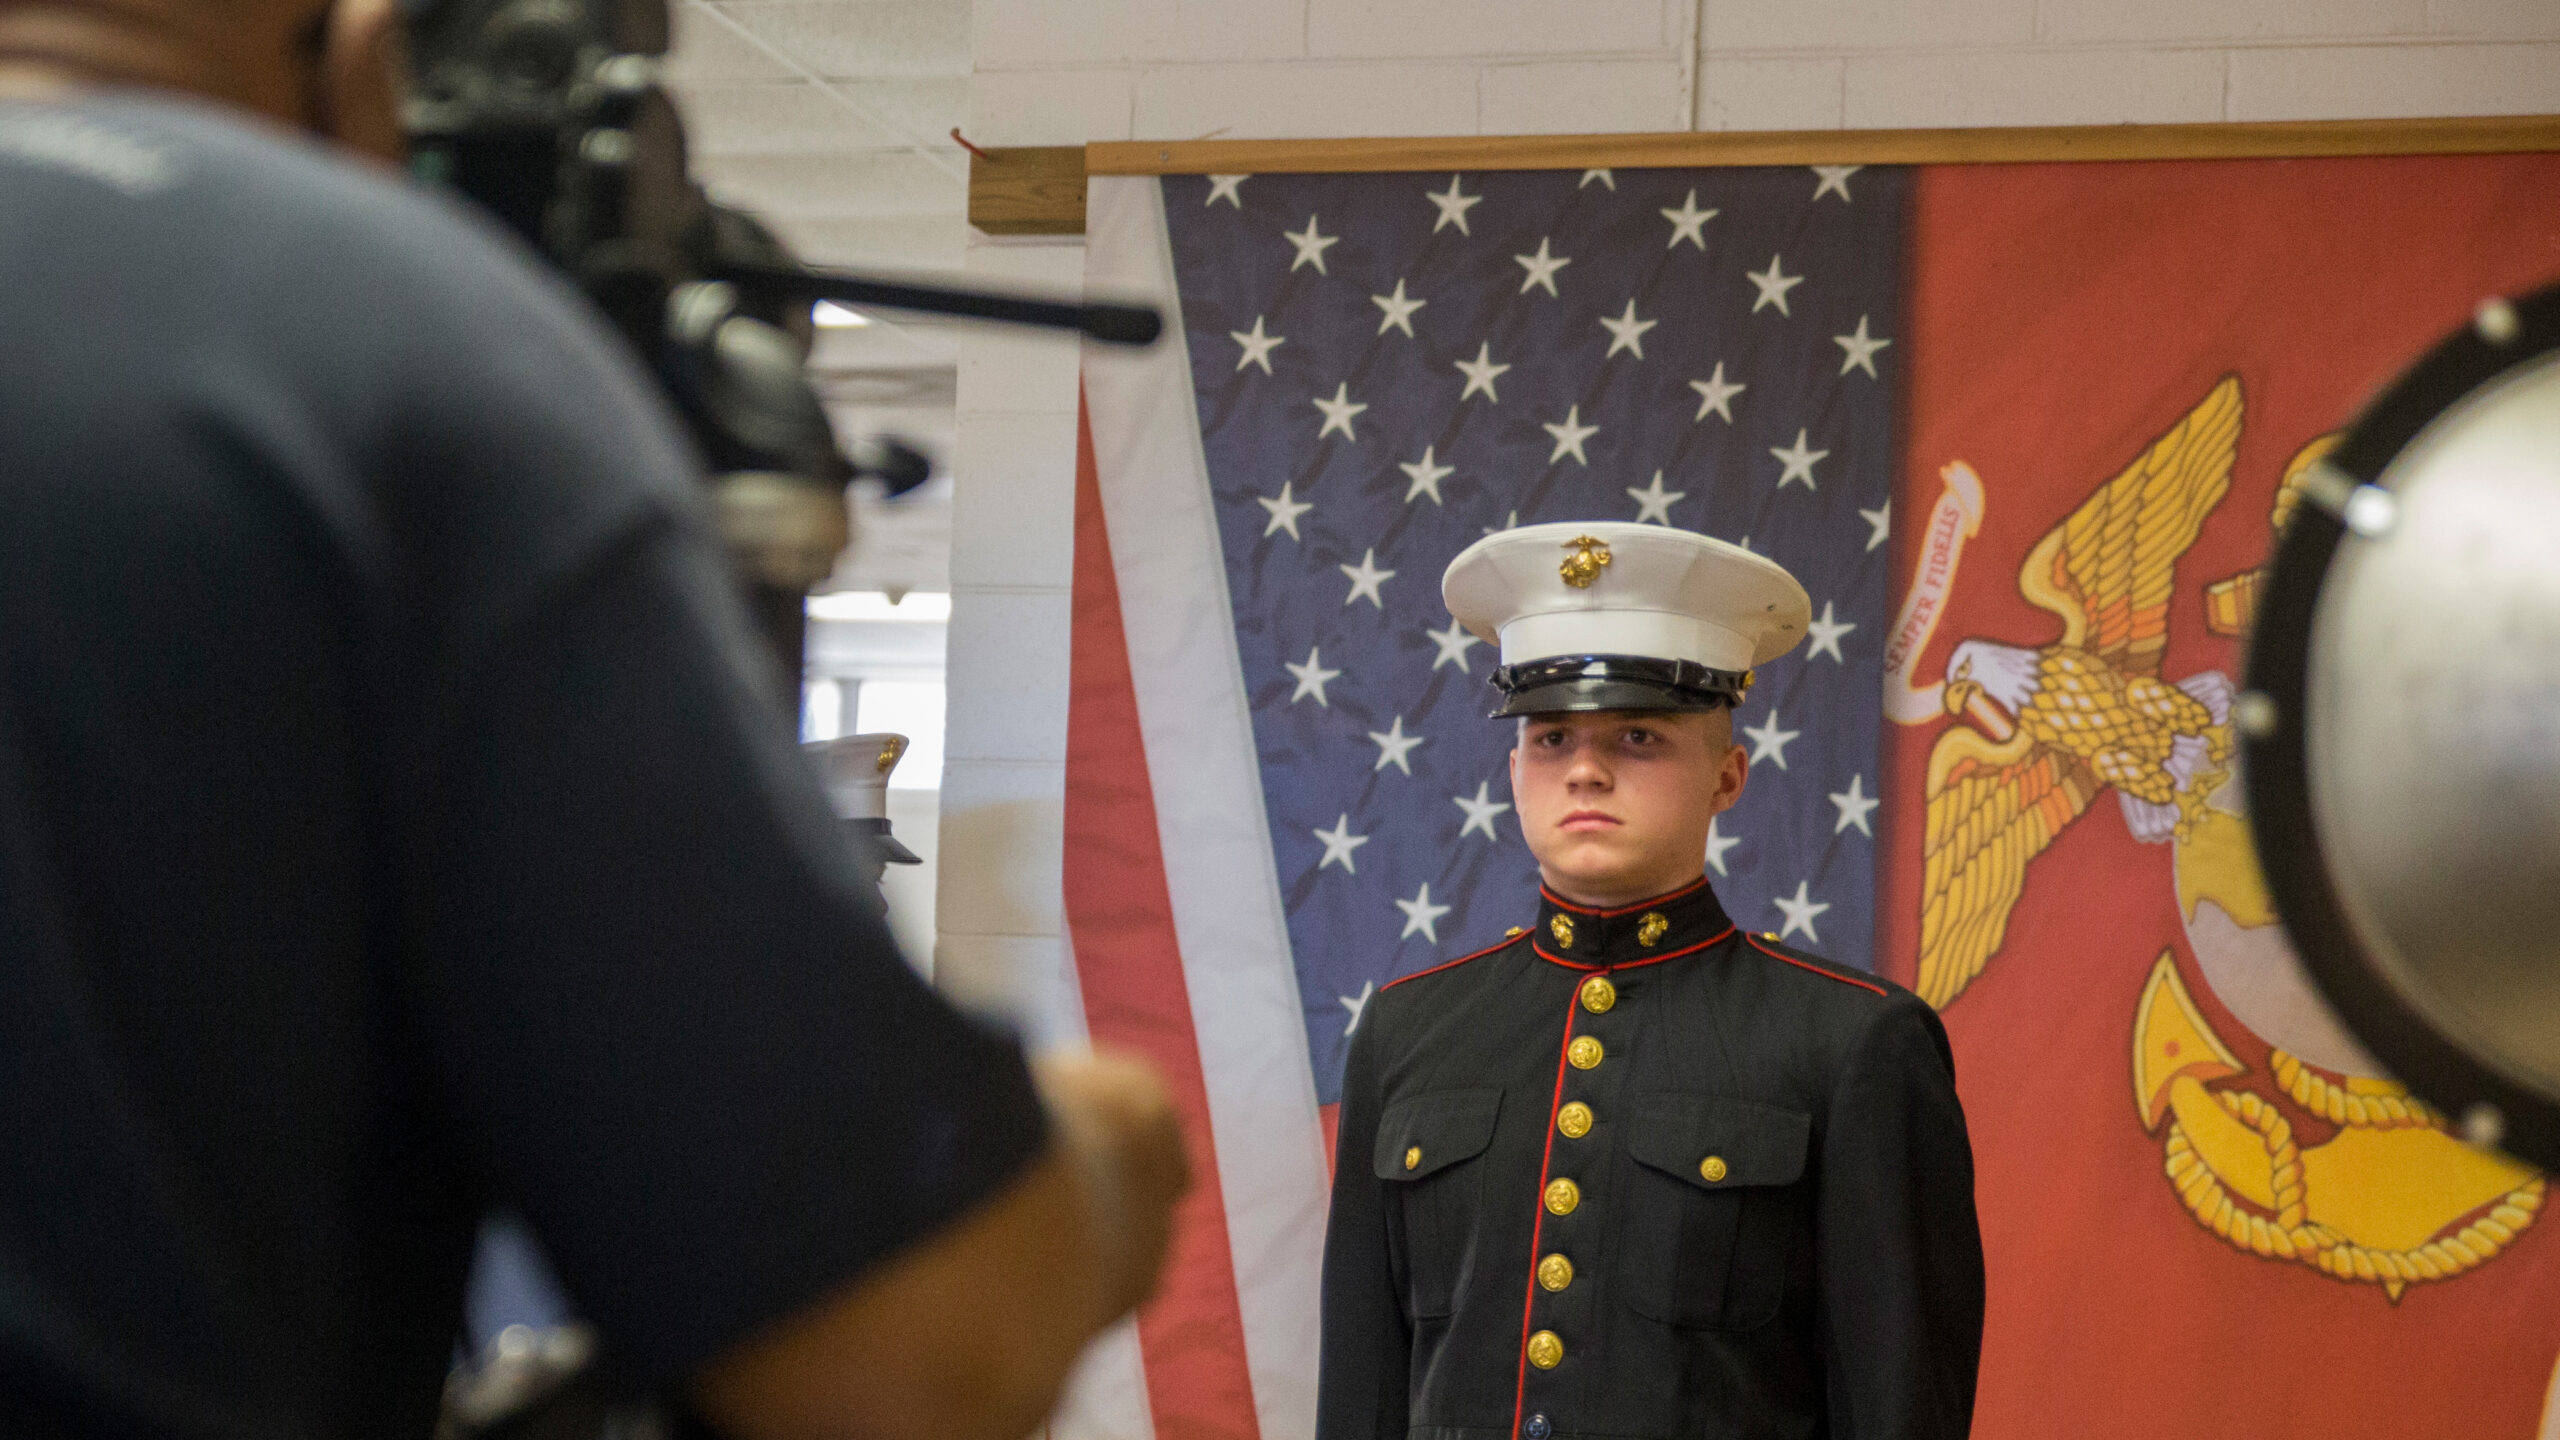 Marines ordered to take official photos for no logical reason whatsoever